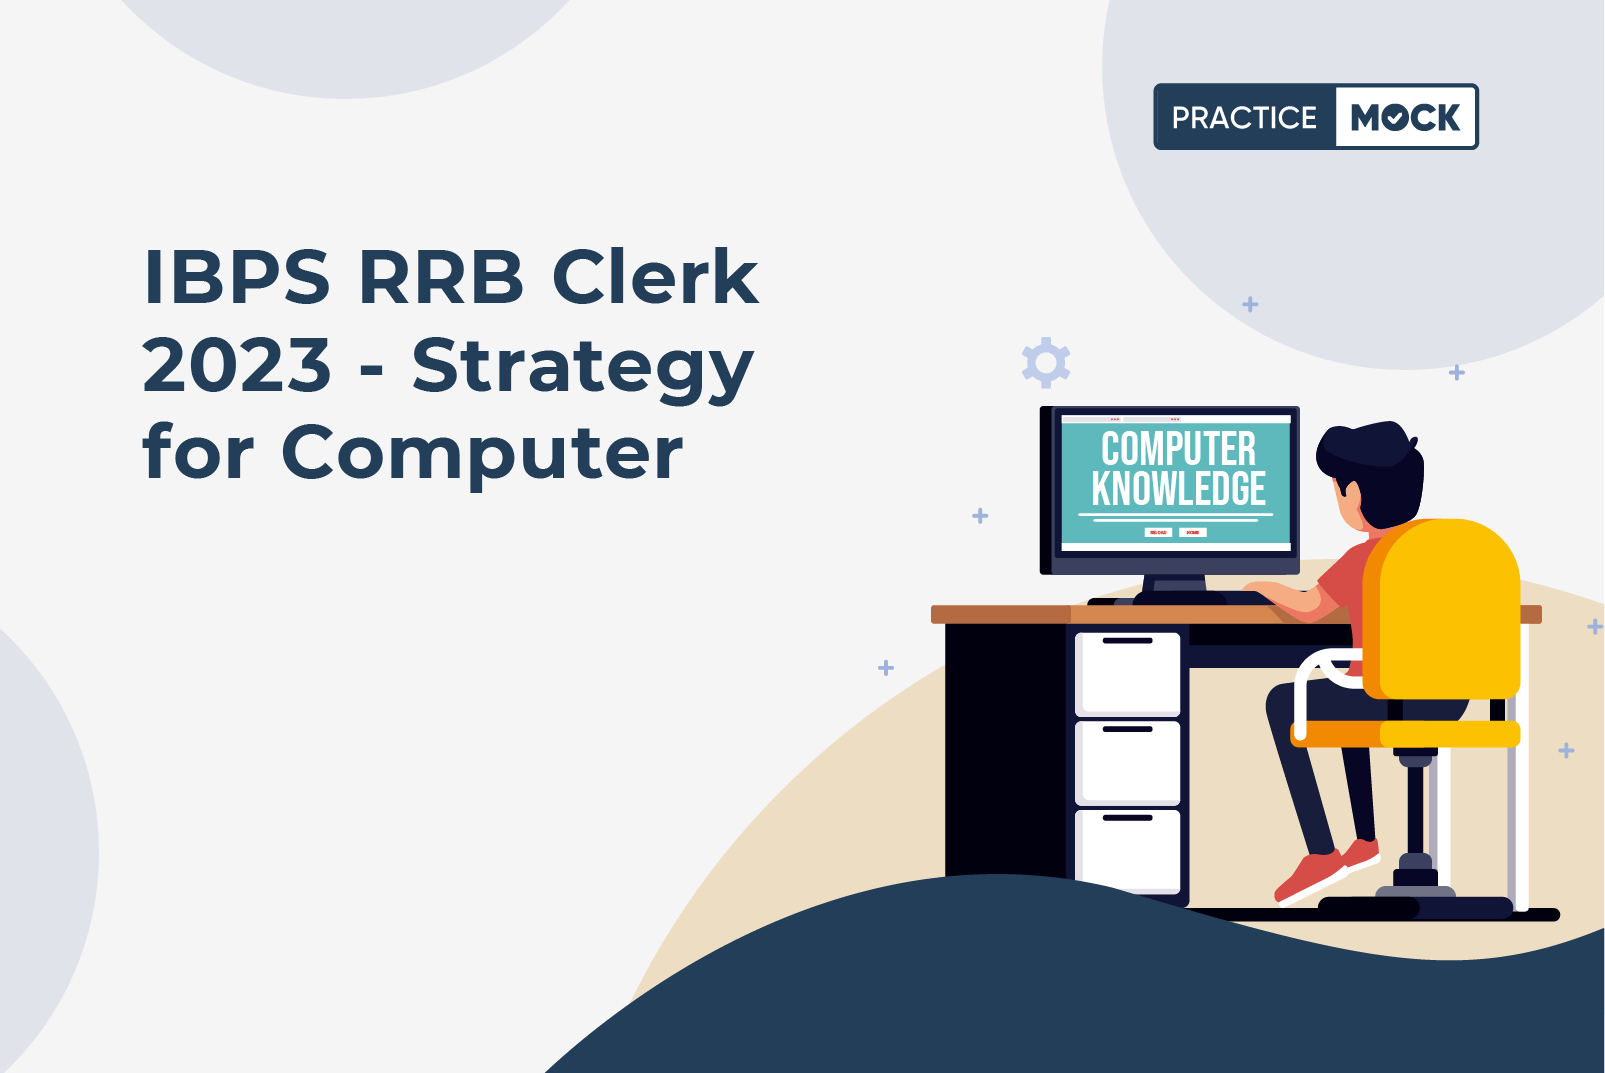 IBPS RRB Clerk 2023 - Strategy for Computers